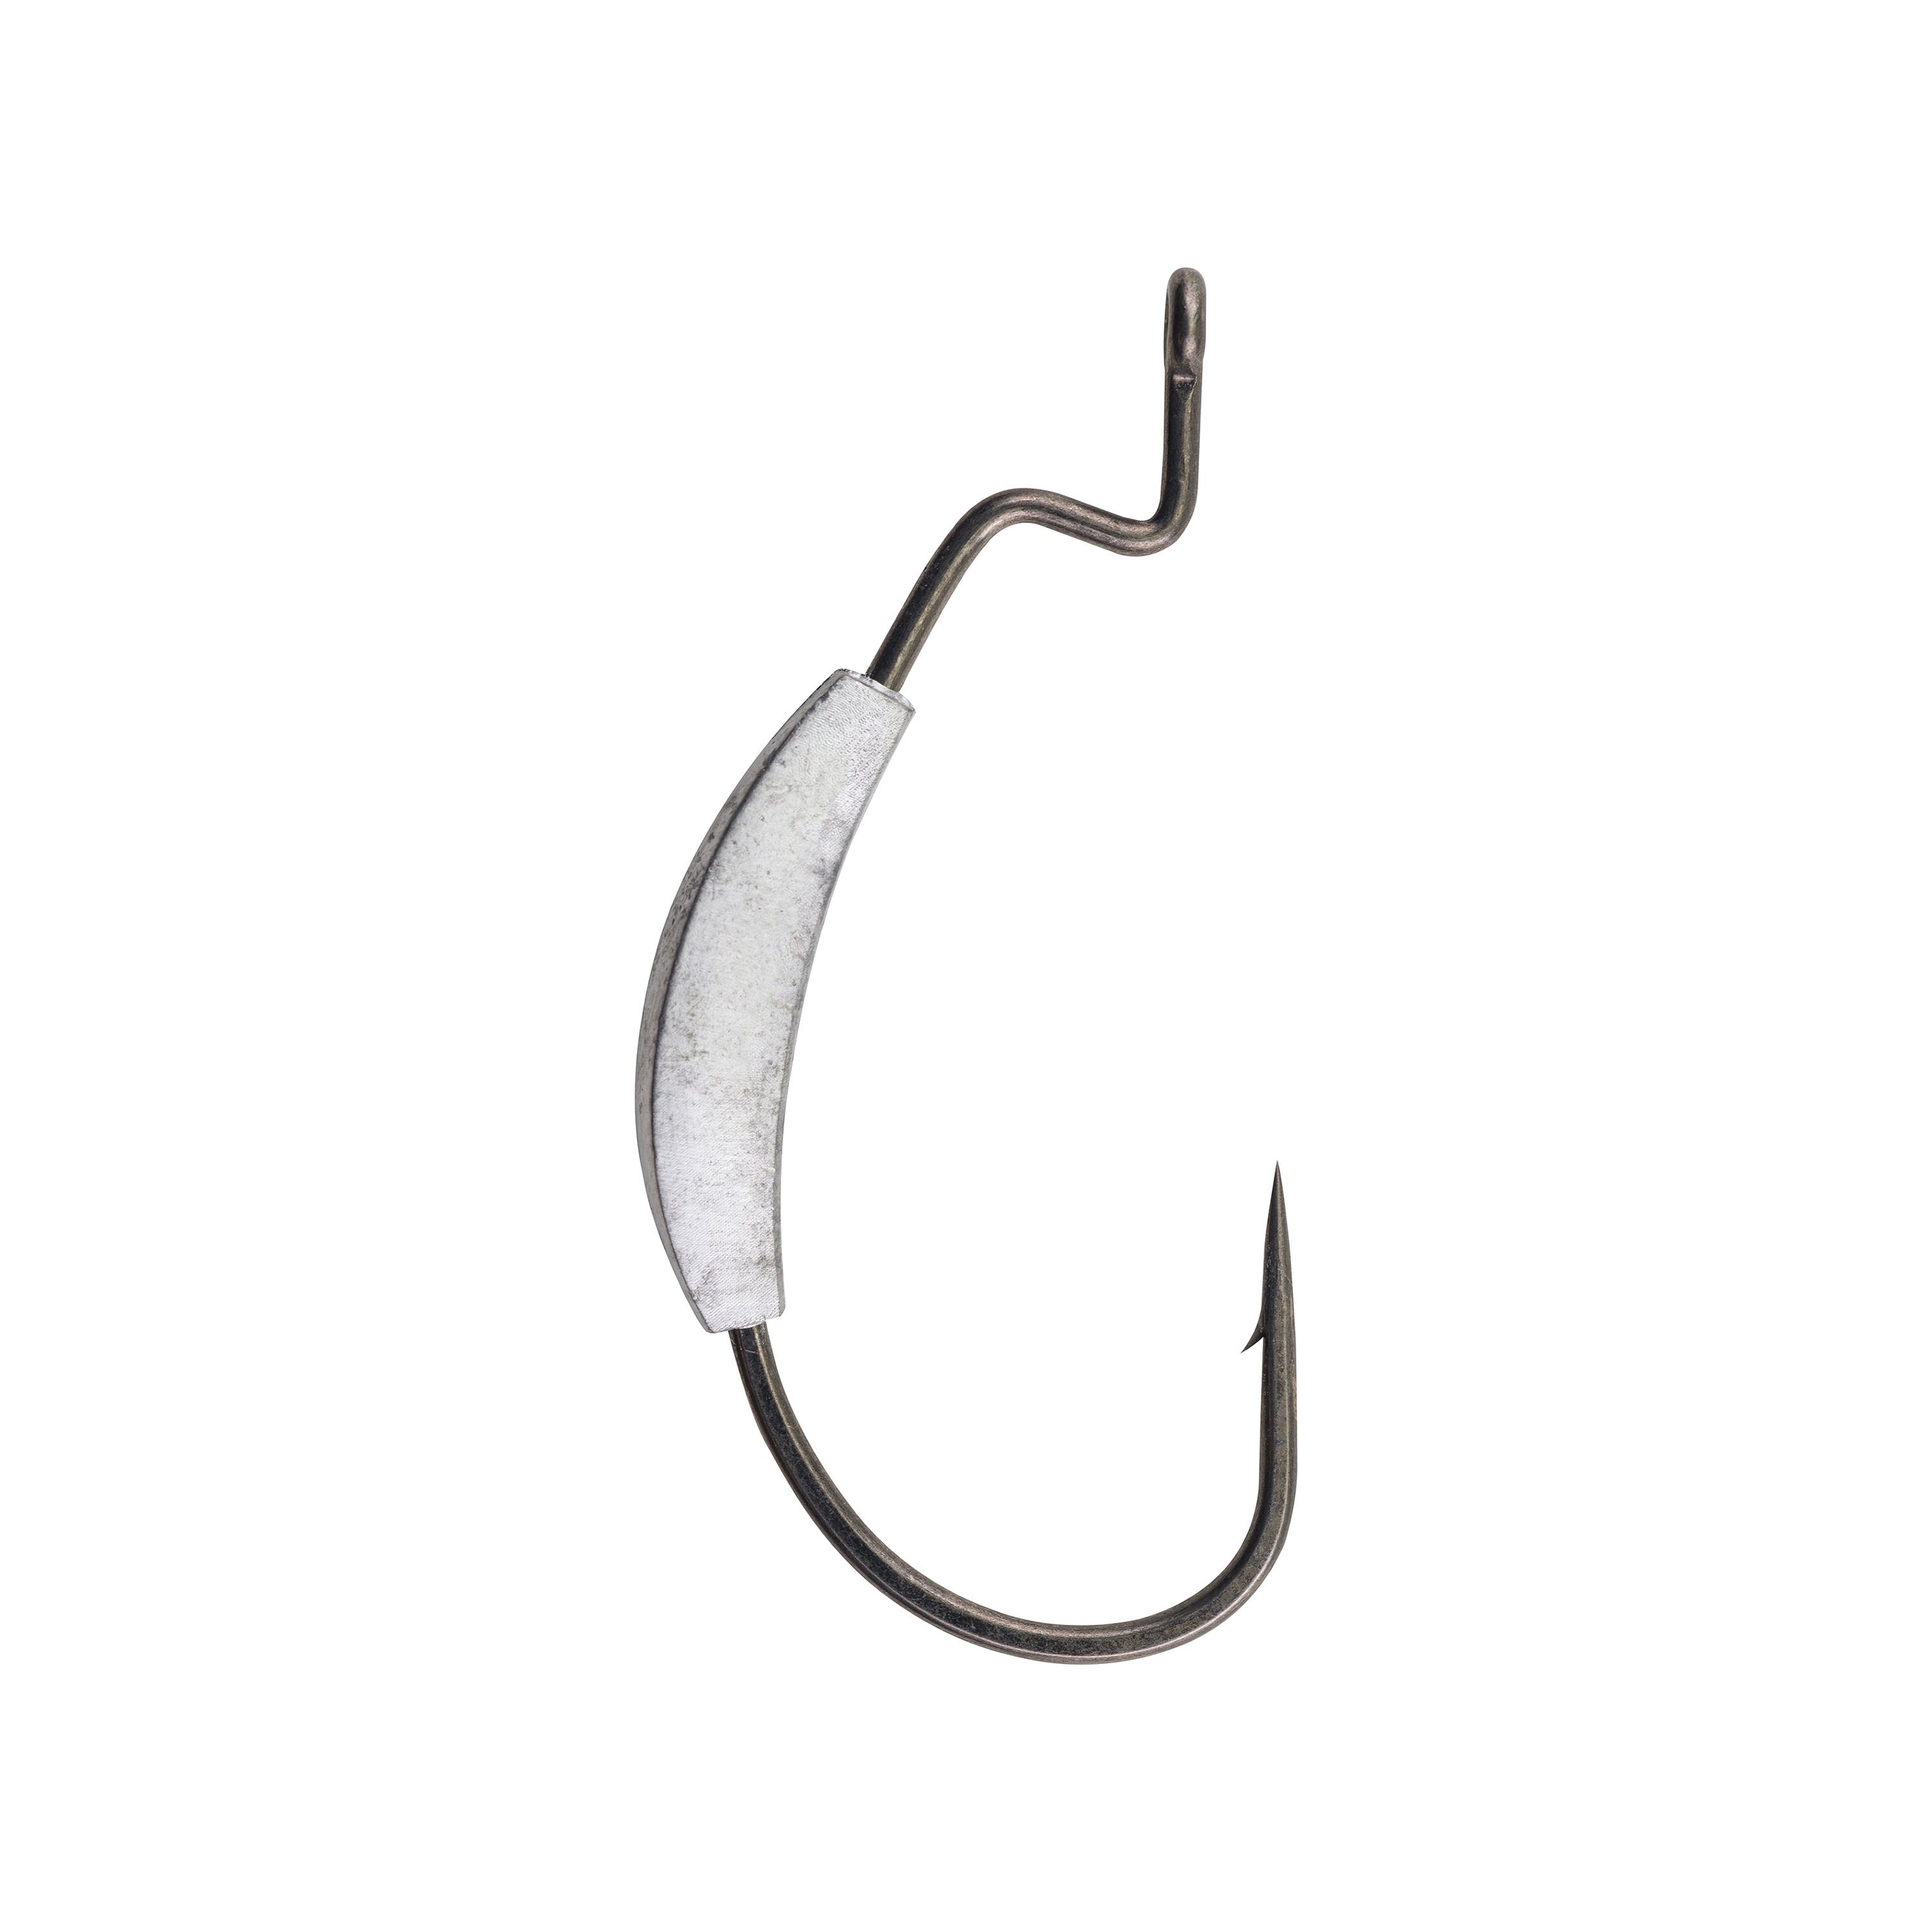 Hayabusa Wrm958Wt Extra Wide Gap Weighted Hook With Screw Lock Fishing Hook 